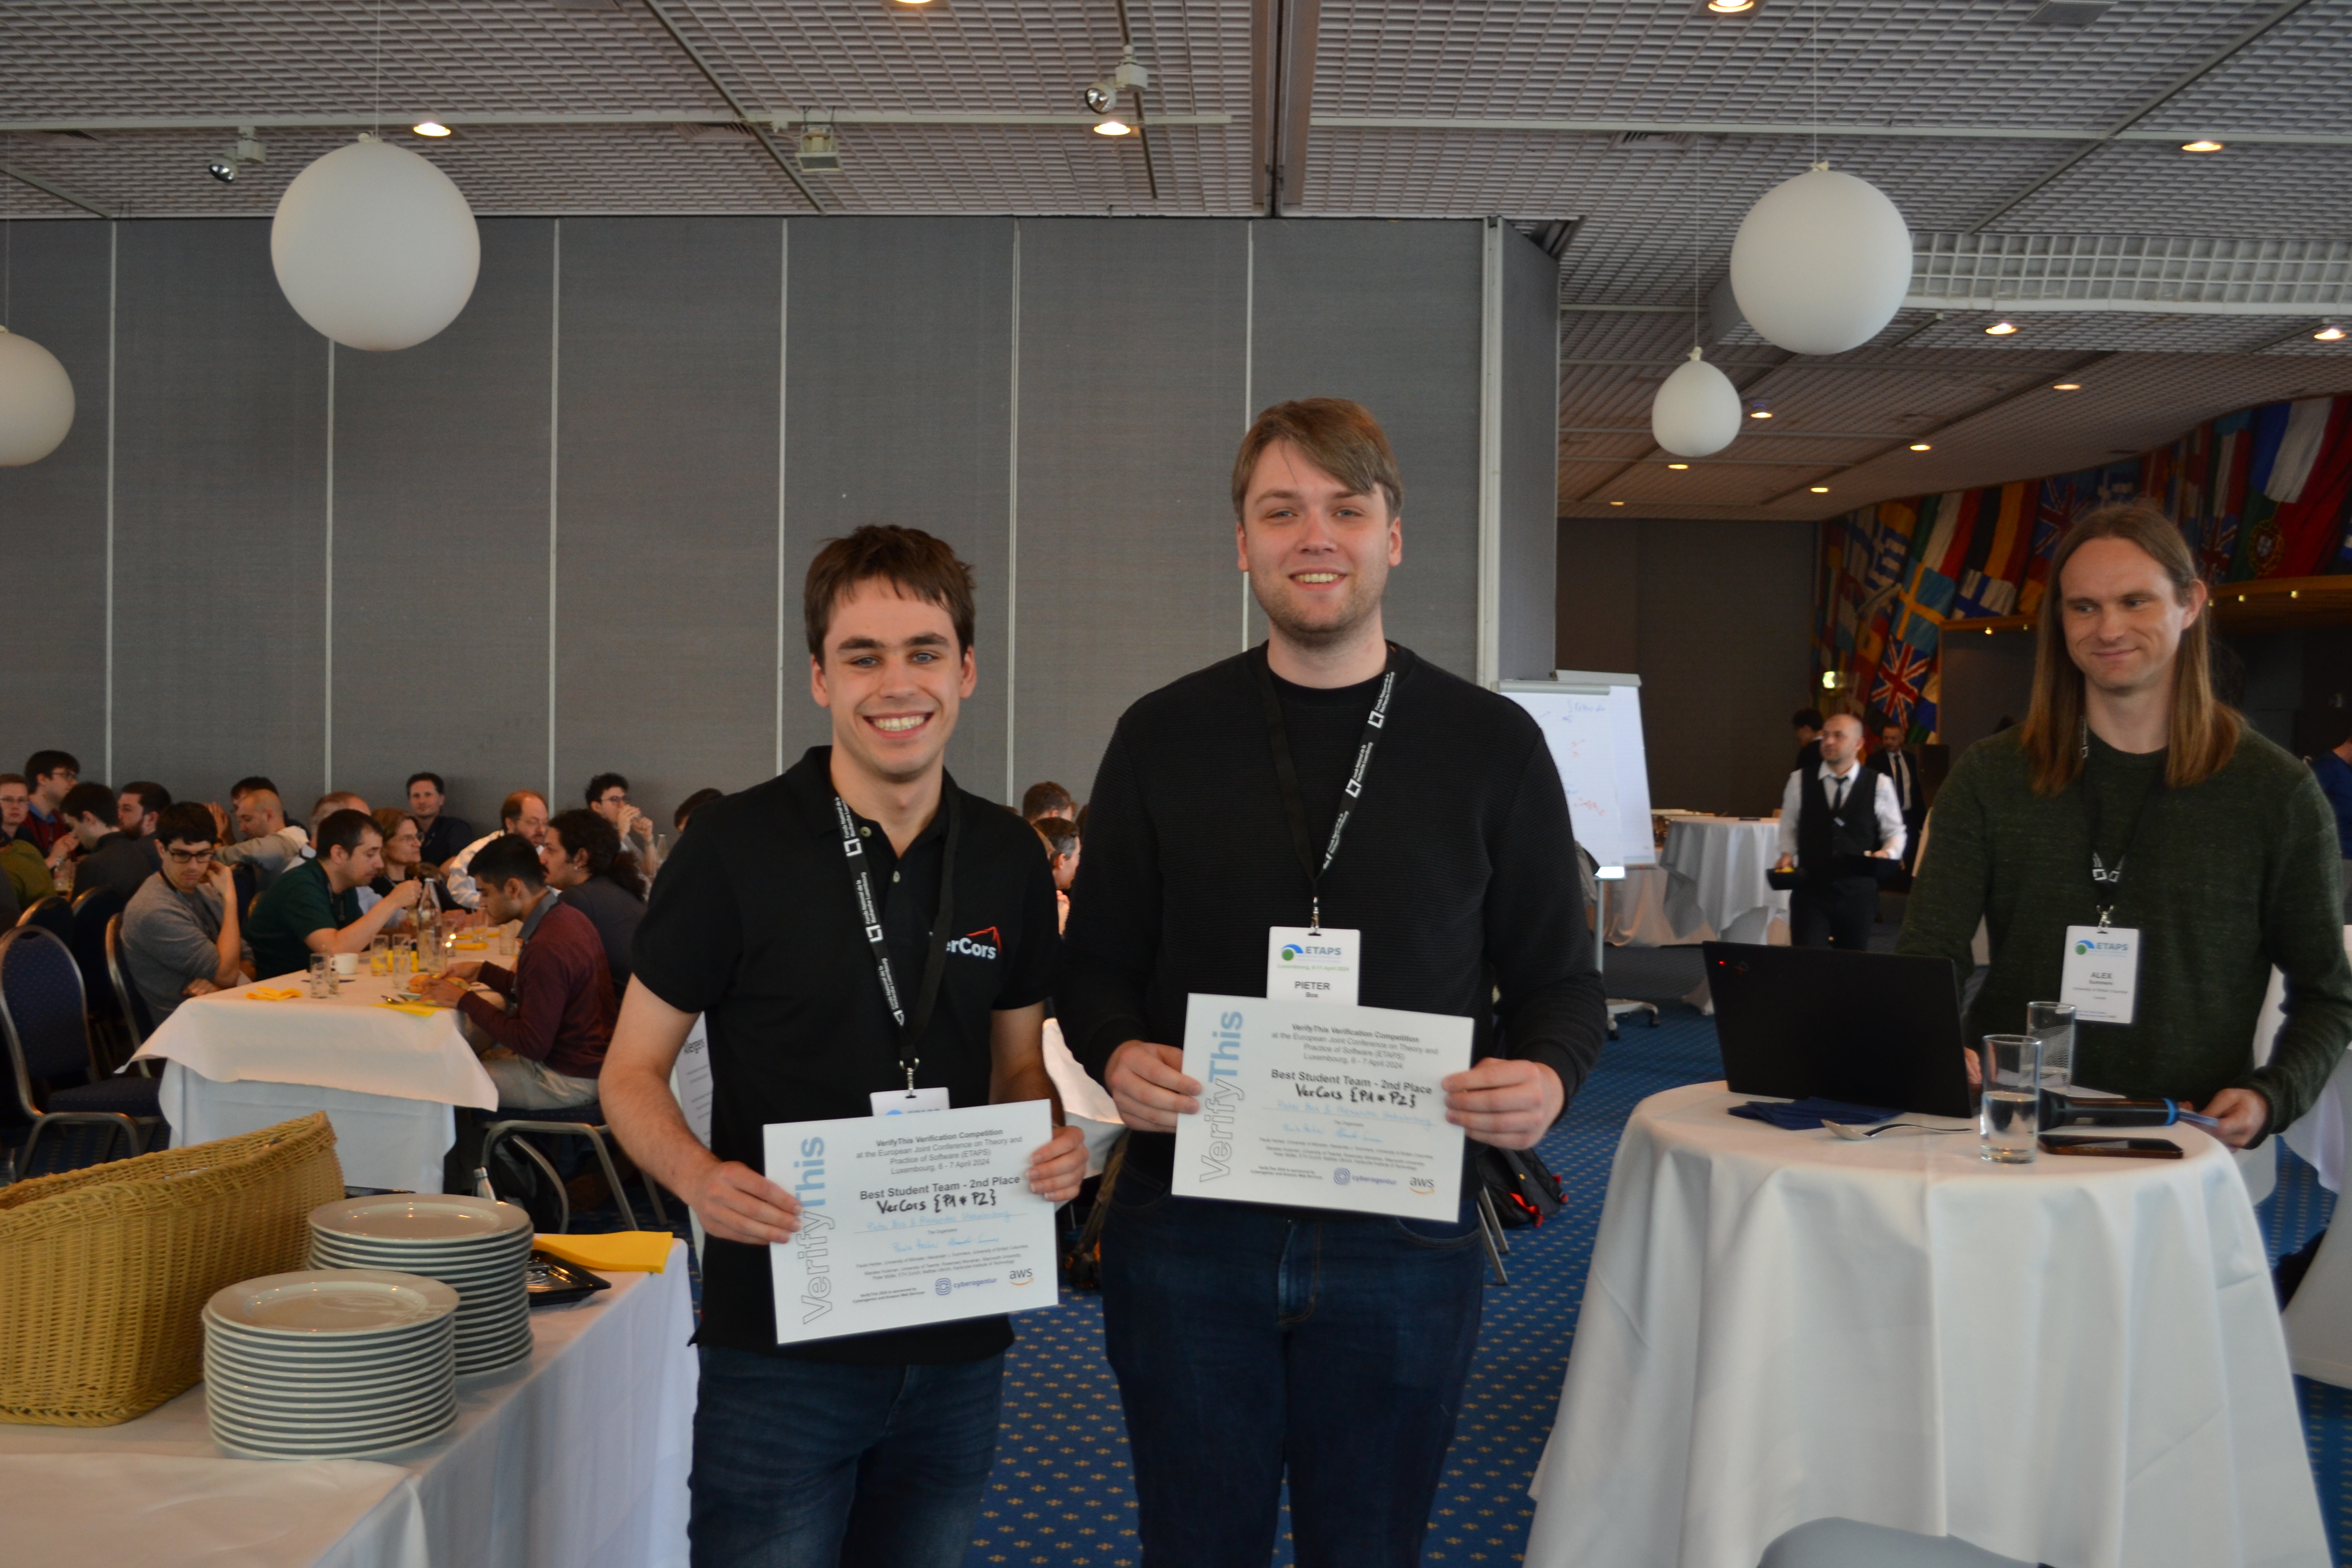 Alexander Stekelenburg and Pieter Bos holding certificates reading Best Student Team - 2nd place - VerCors {P1*P2}